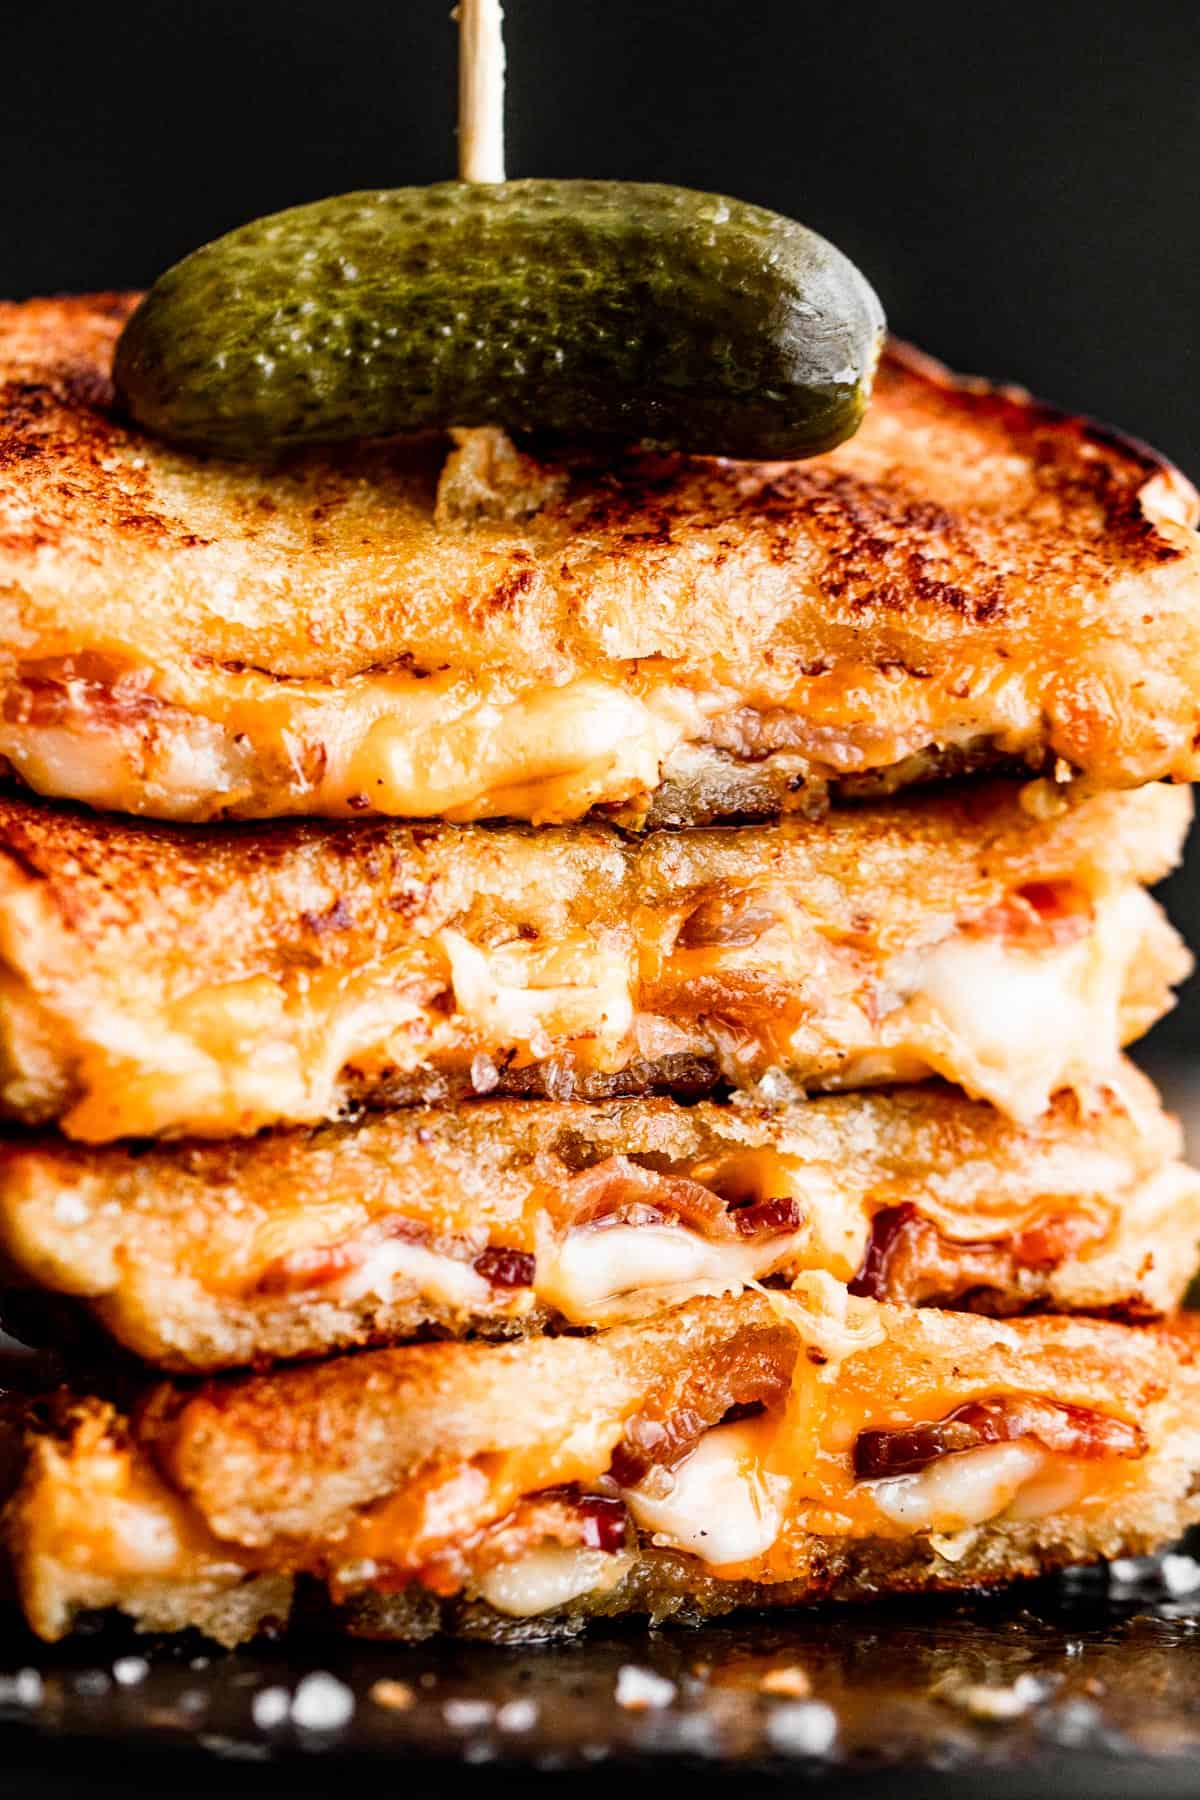 stack of grilled cheese sandwiches topped with a pickle and a long toothpick going through the sandwiches, from top to bottom